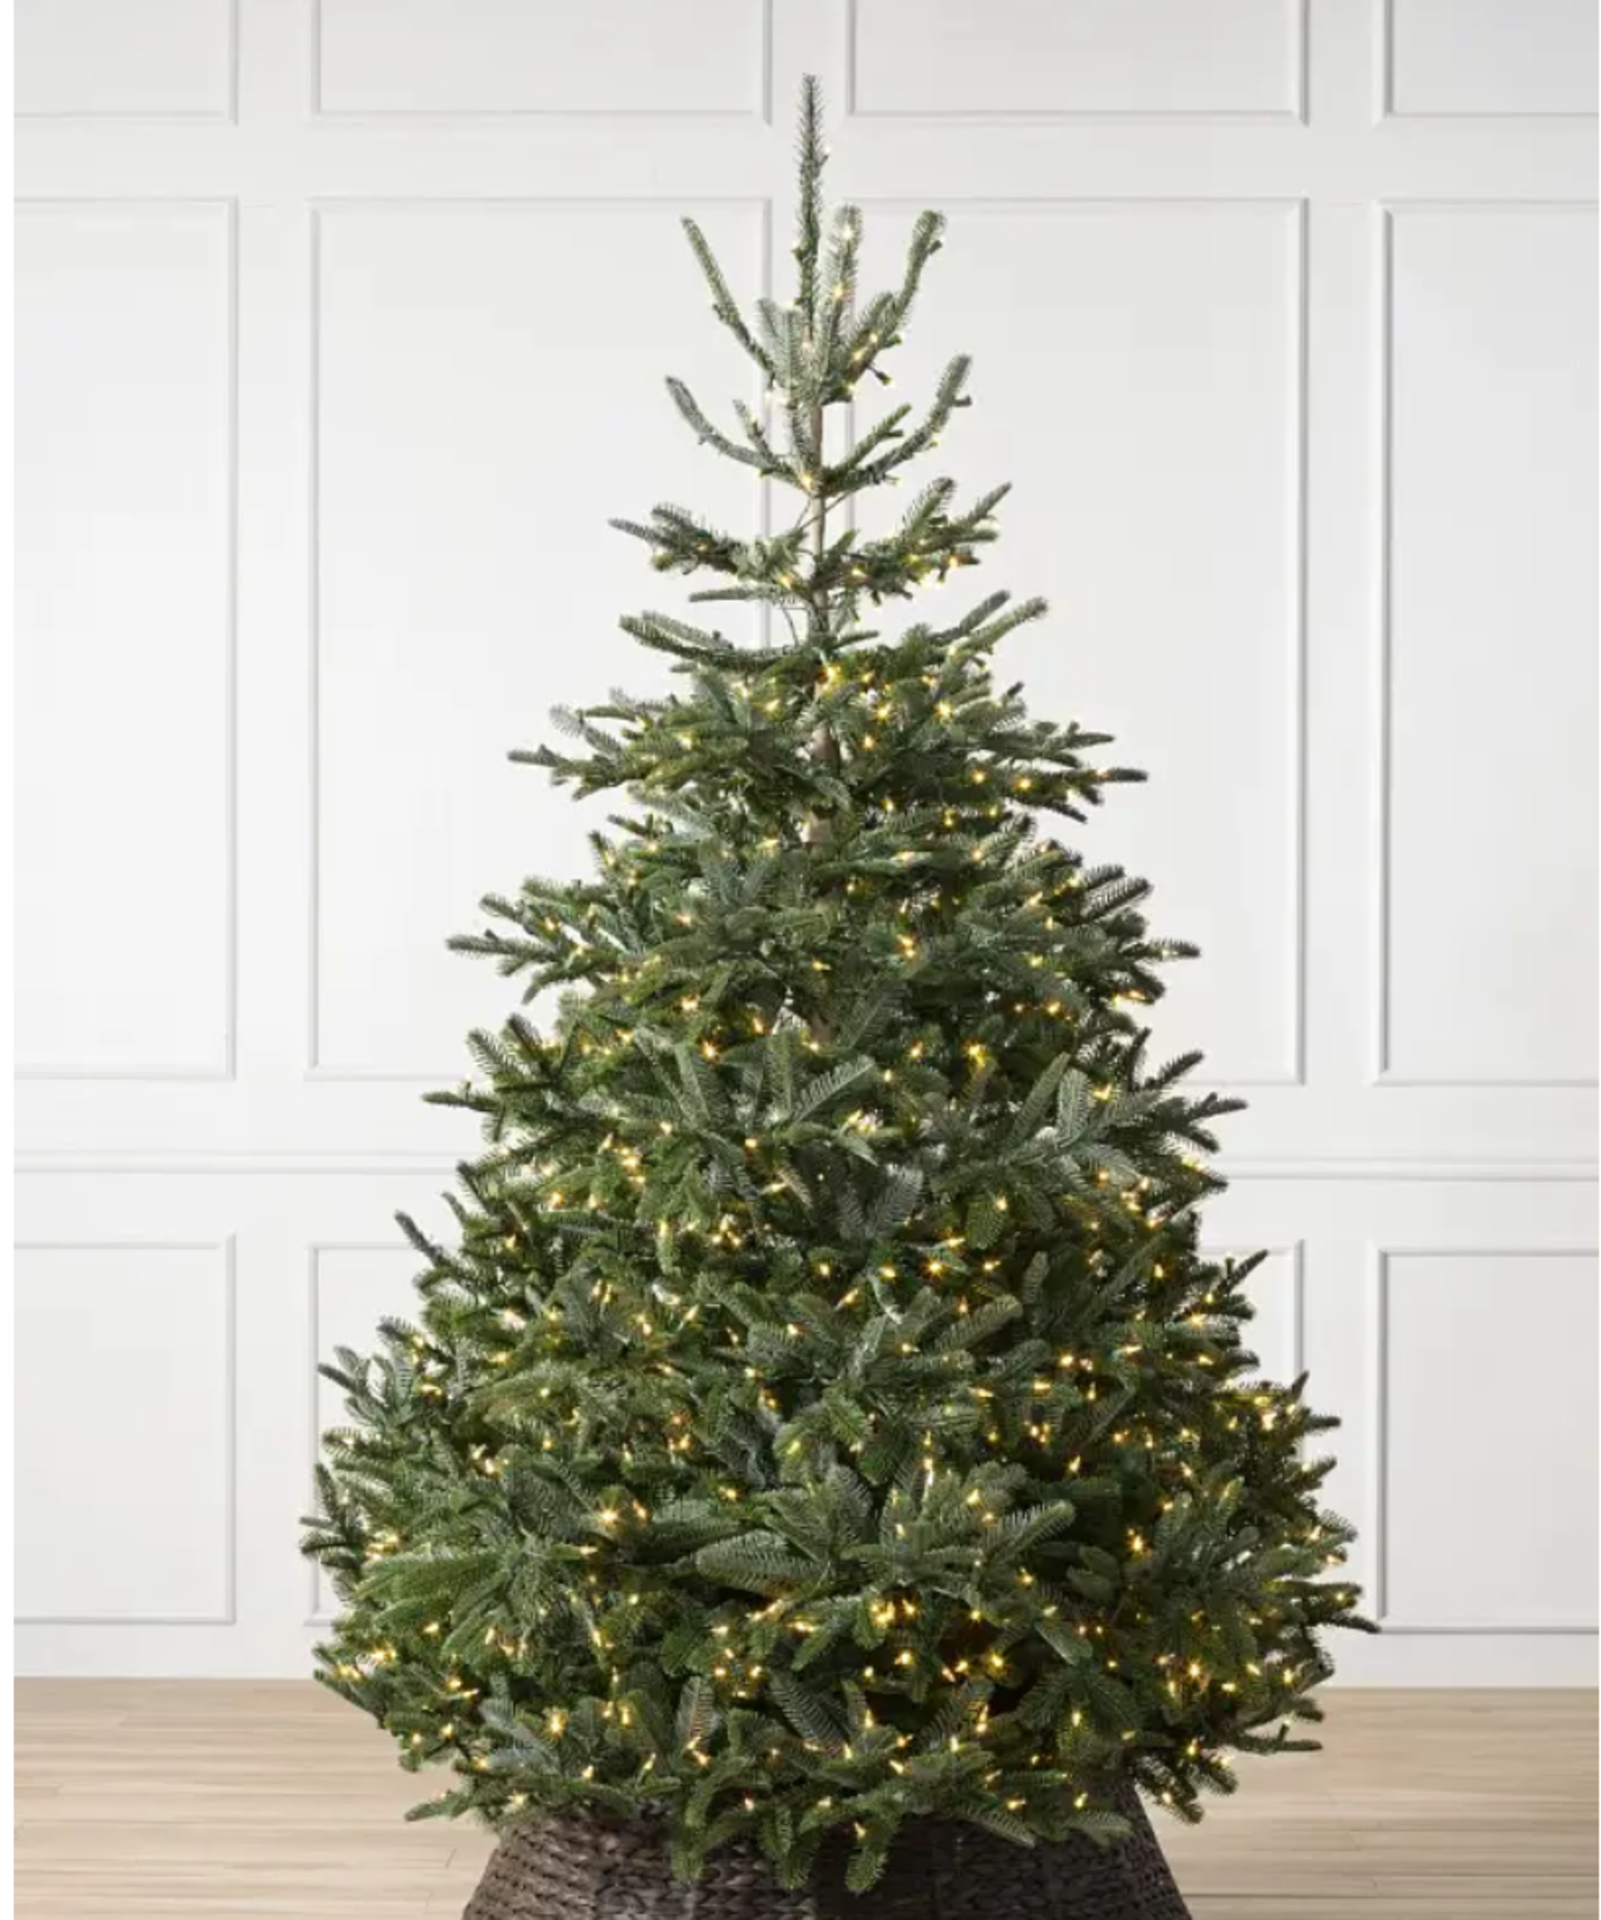 BH (The worlds leading Christmas Trees) BH Nordmann Fir 6ft with LED Clear Lights. RRP £799.00.